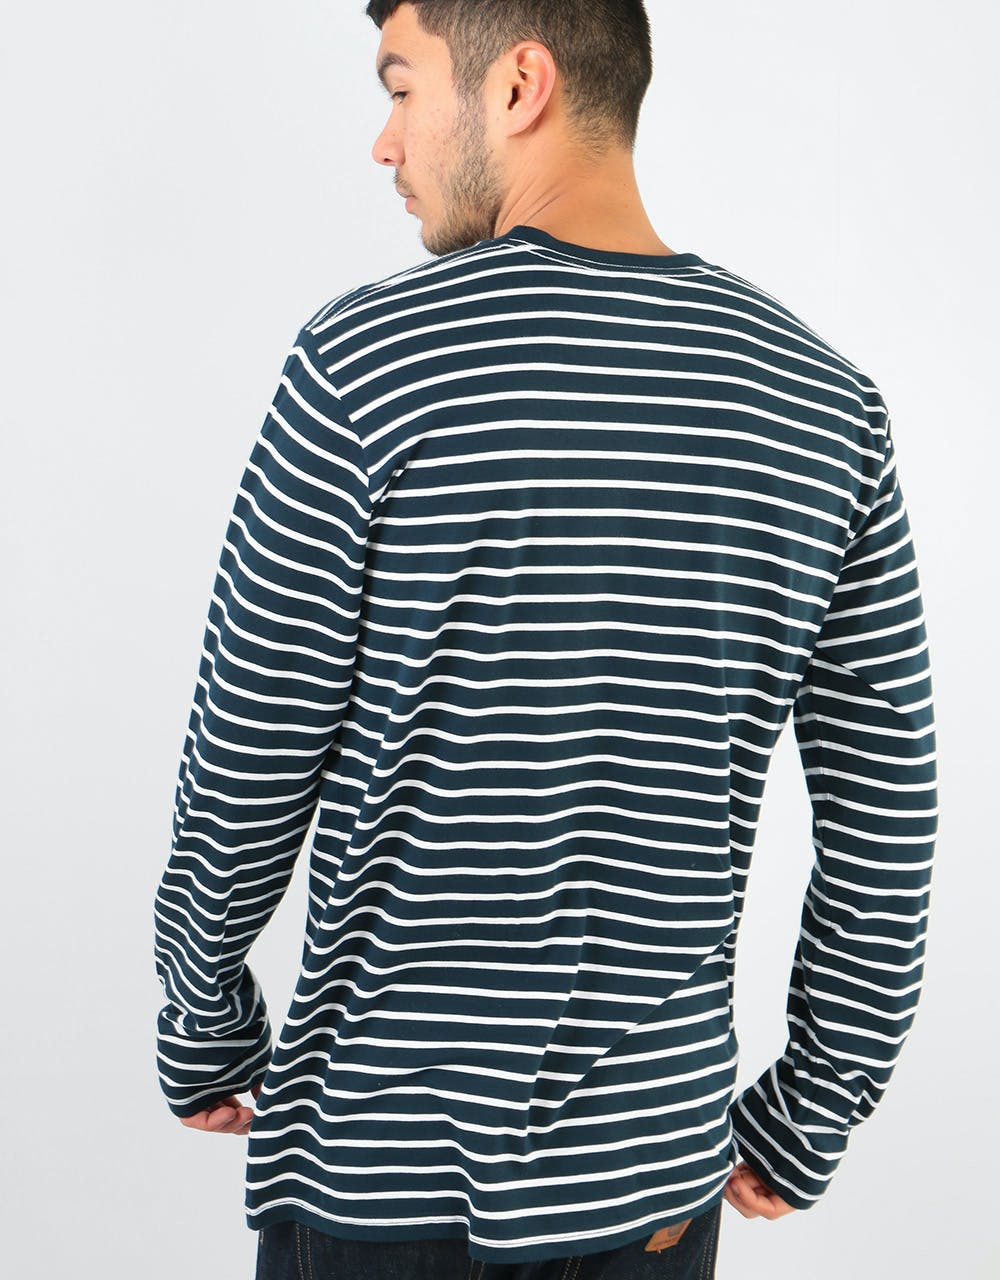 Route One Match Stripe LS T-Shirt - Navy/White